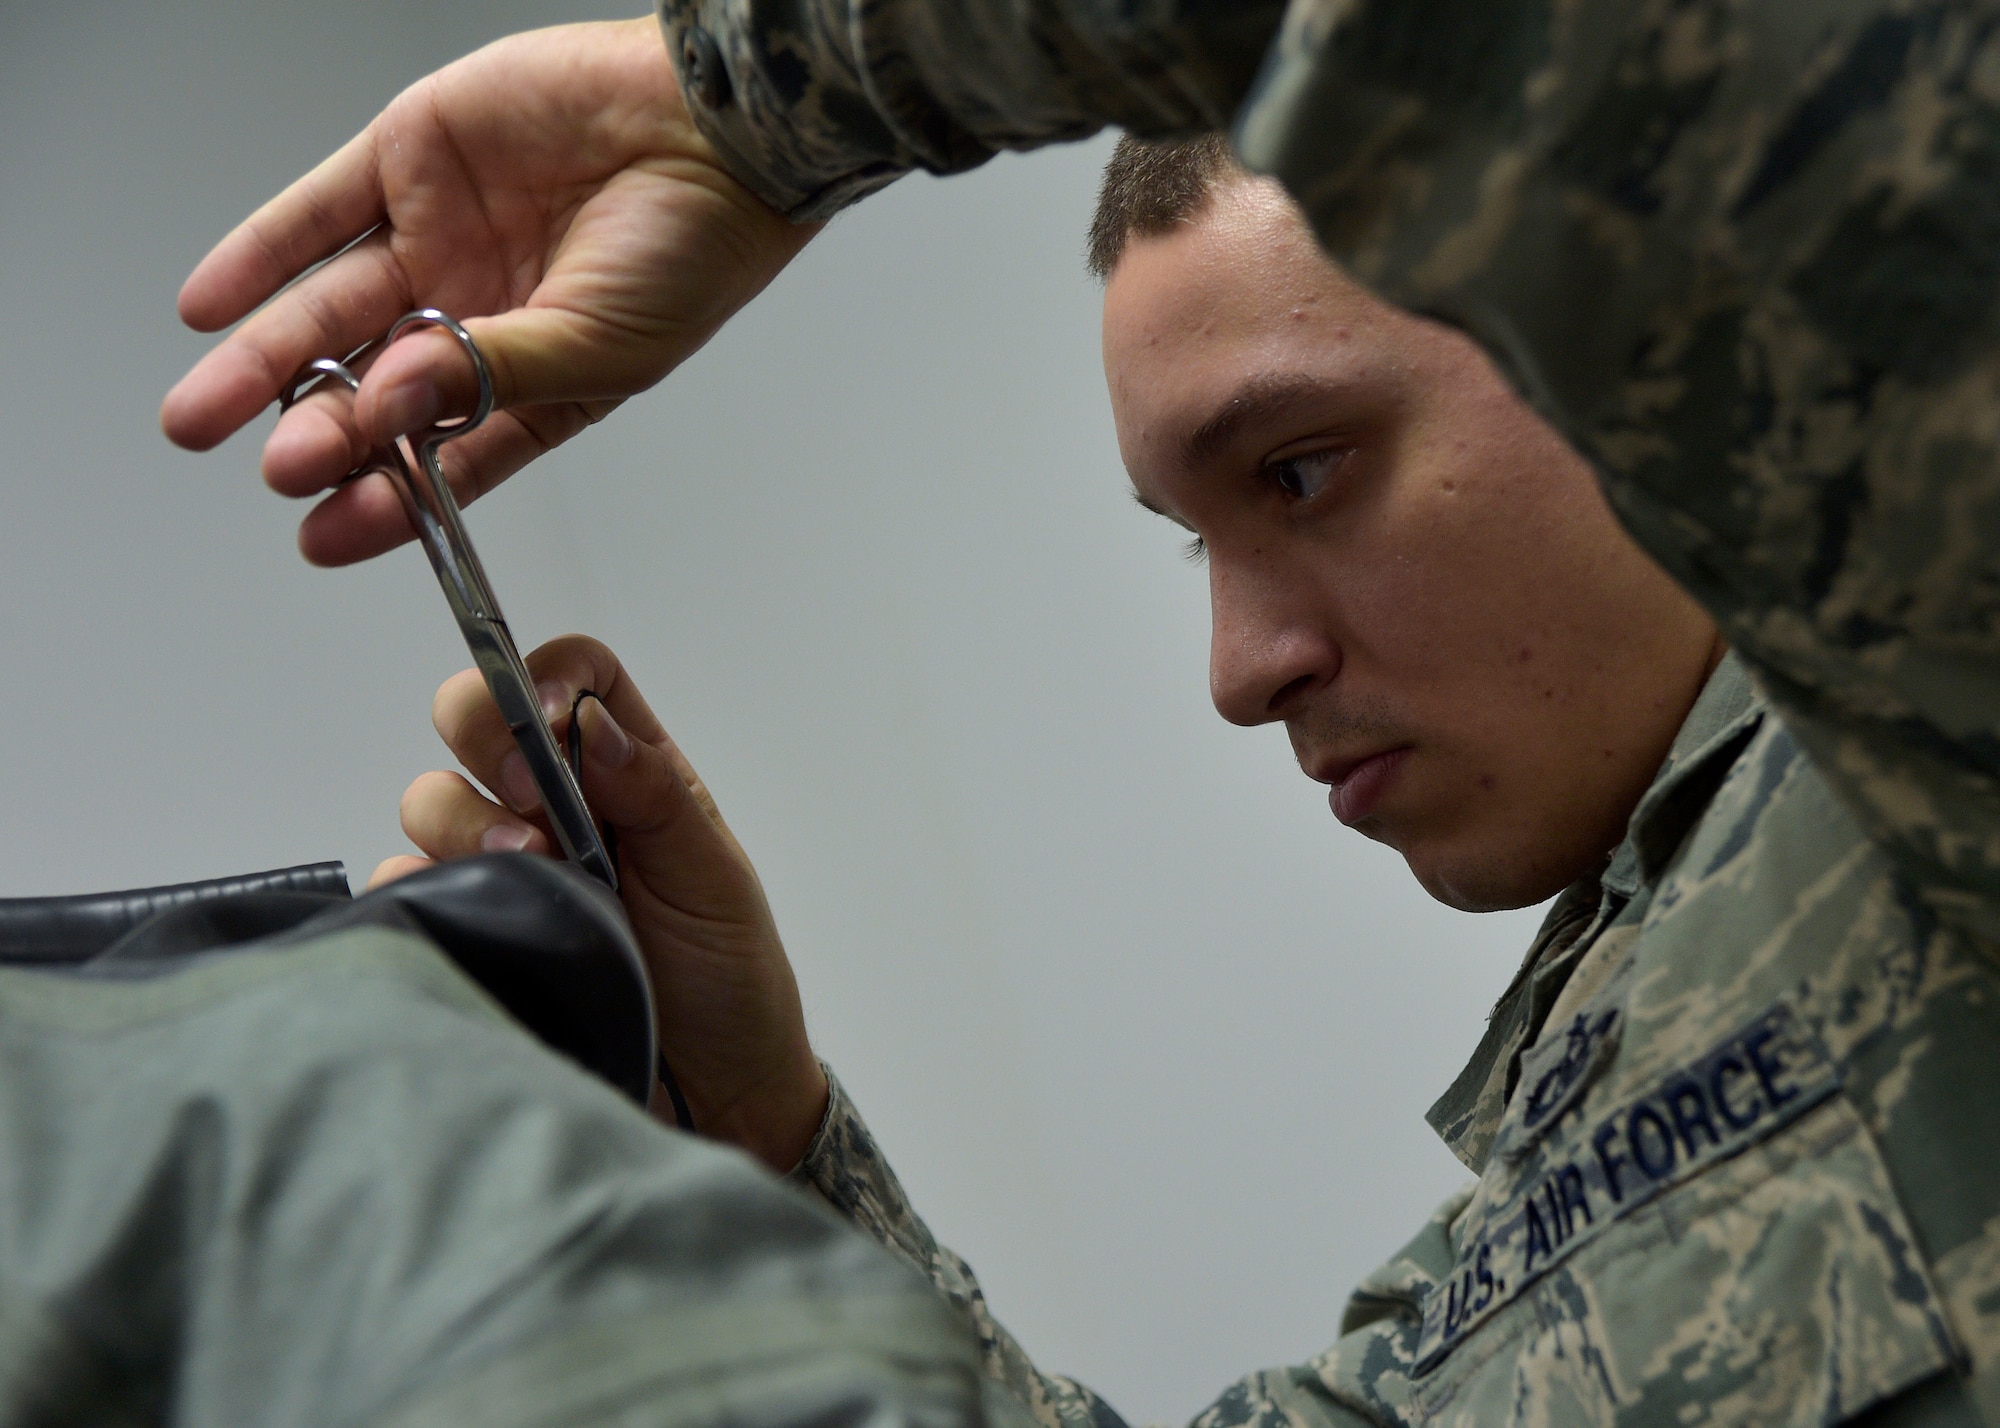 U.S. Air Force Staff Sgt. James Berg, an aircrew flight equipment craftsman with the 35th Operations Support Squadron, cuts a rubber ring off a suit at Misawa Air Base, Japan, March 8, 2016. An off-the-side suit is used during the winter months or when pilots are flying over water. (U.S. Air Force photo by Senior Airman Deana Heitzman)